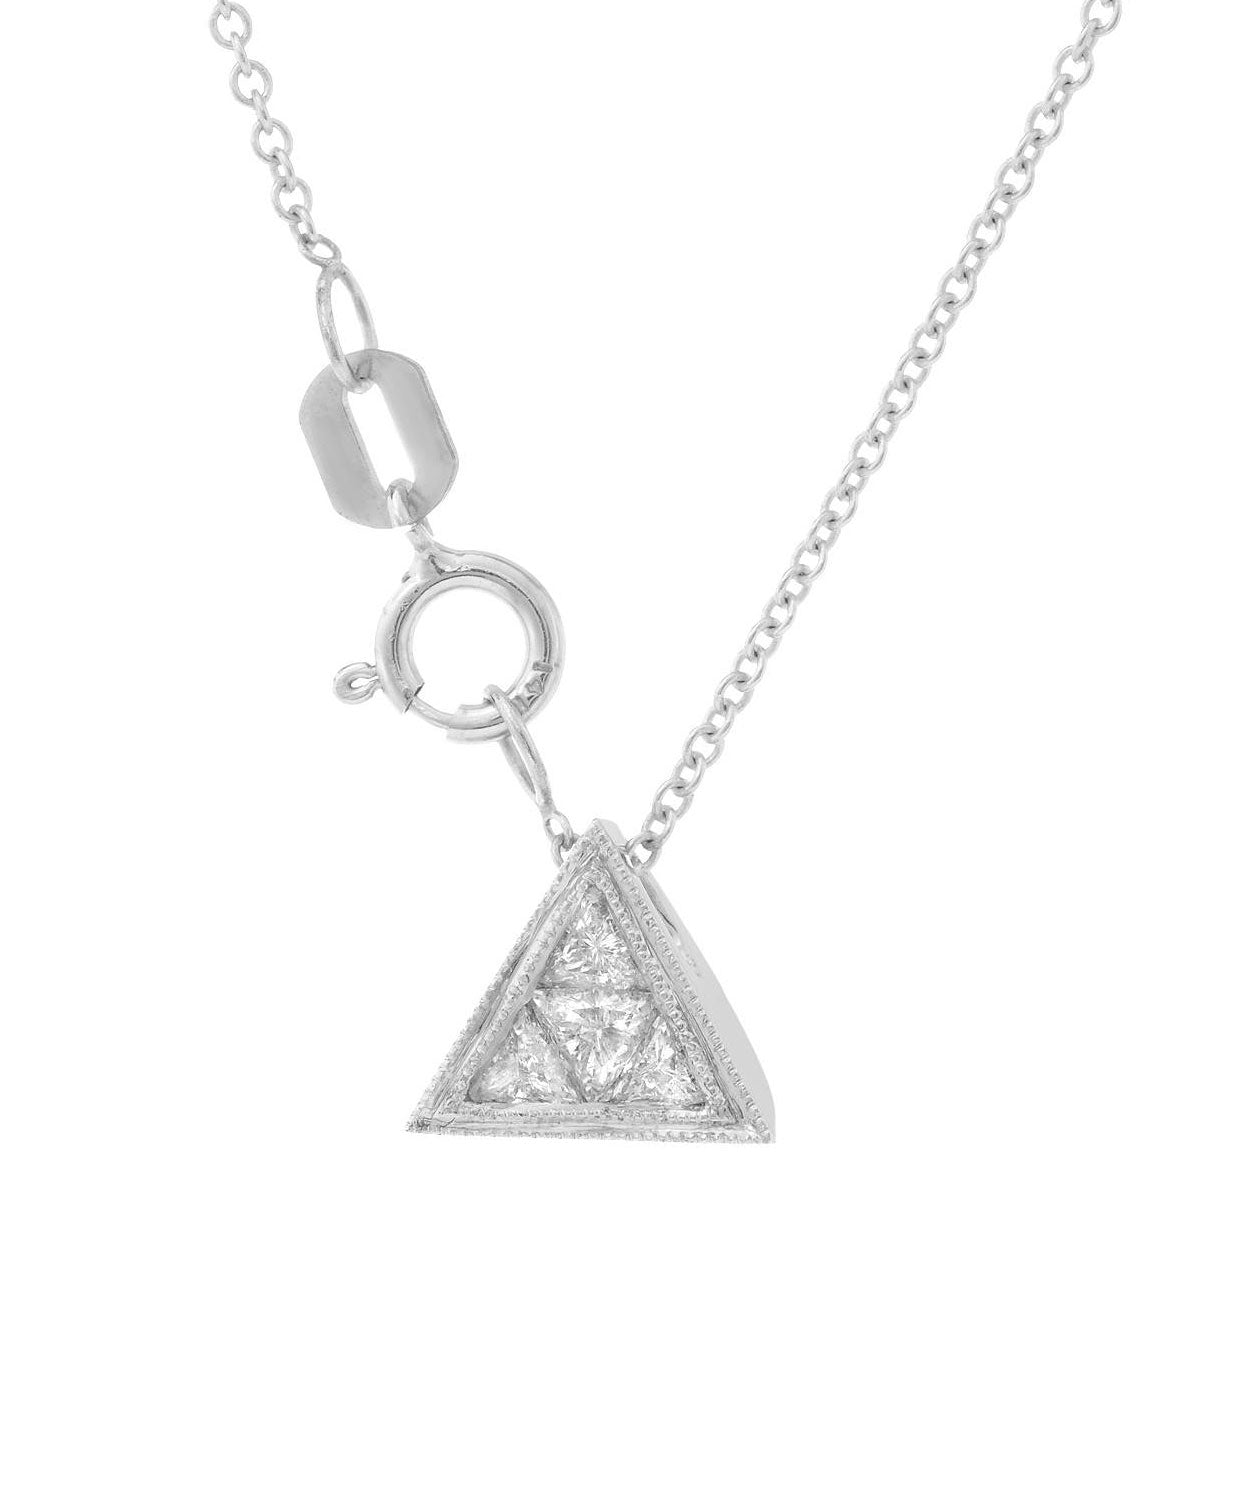 Signature Collection 0.21 ctw Diamond 14k Gold Triangle Pendant With Chain View 2